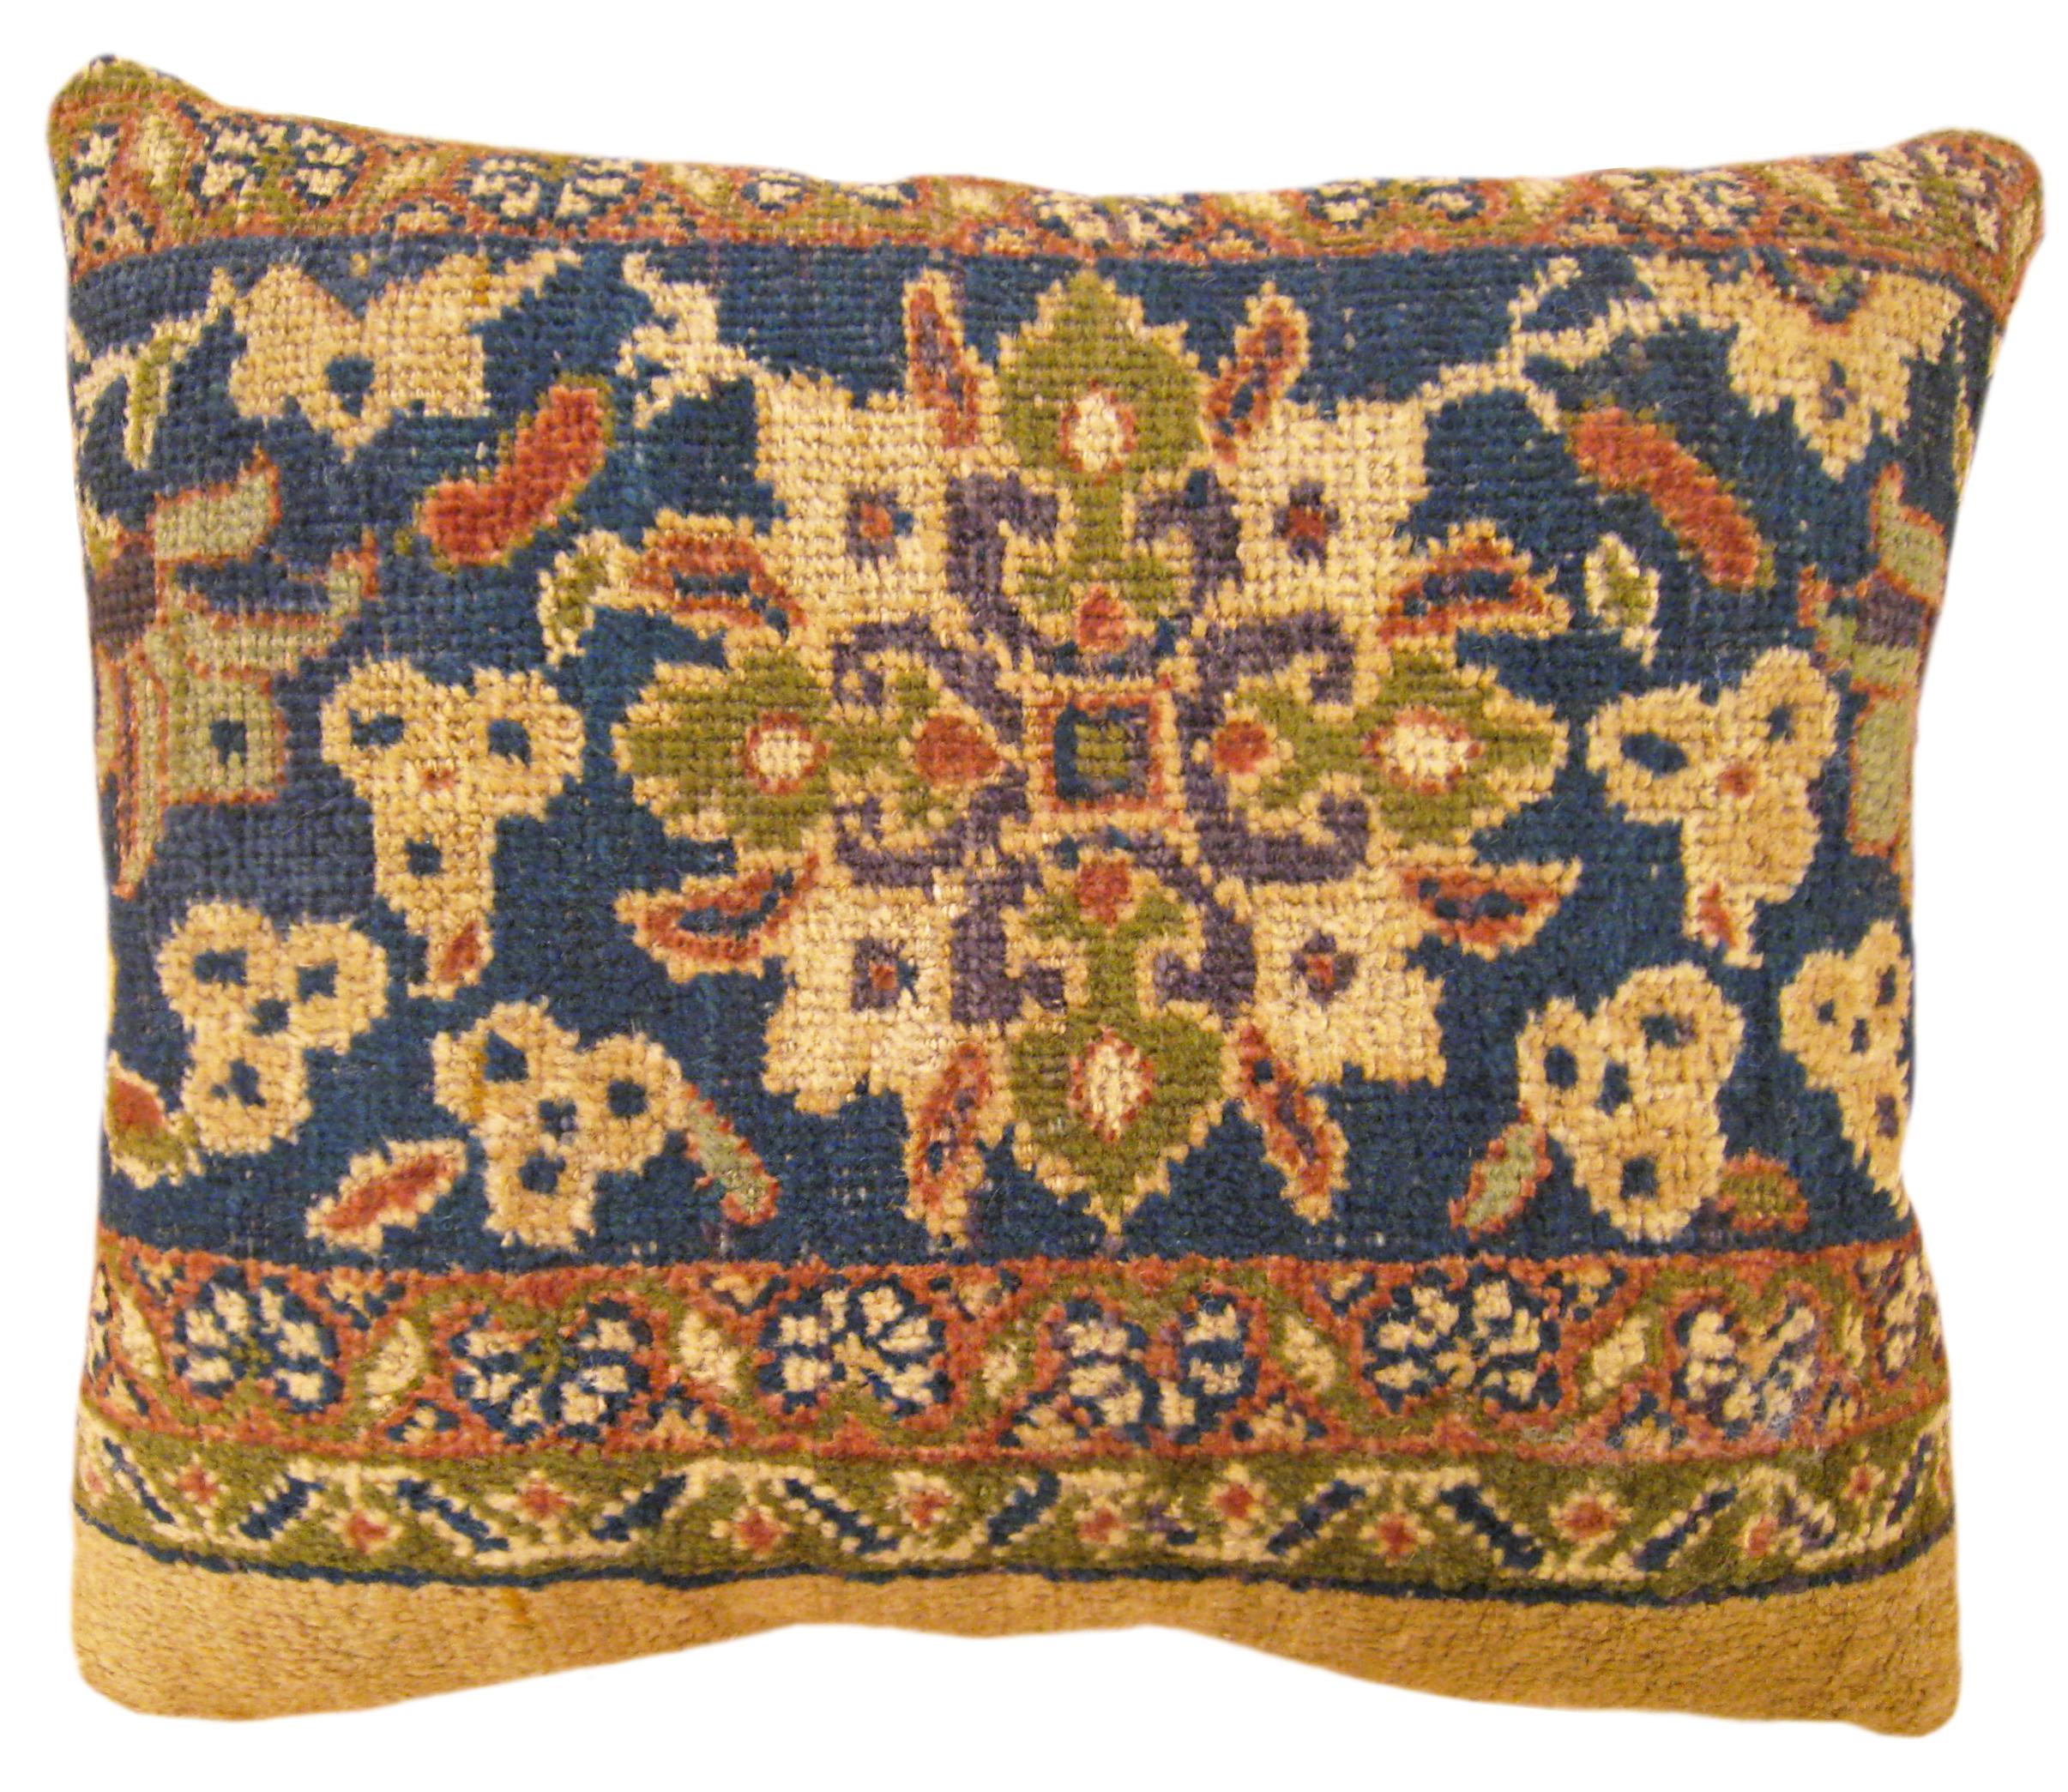 Early 20th Century Pari of Decorative Antique Persian Sultanabad Carpet Pillows with Floral For Sale